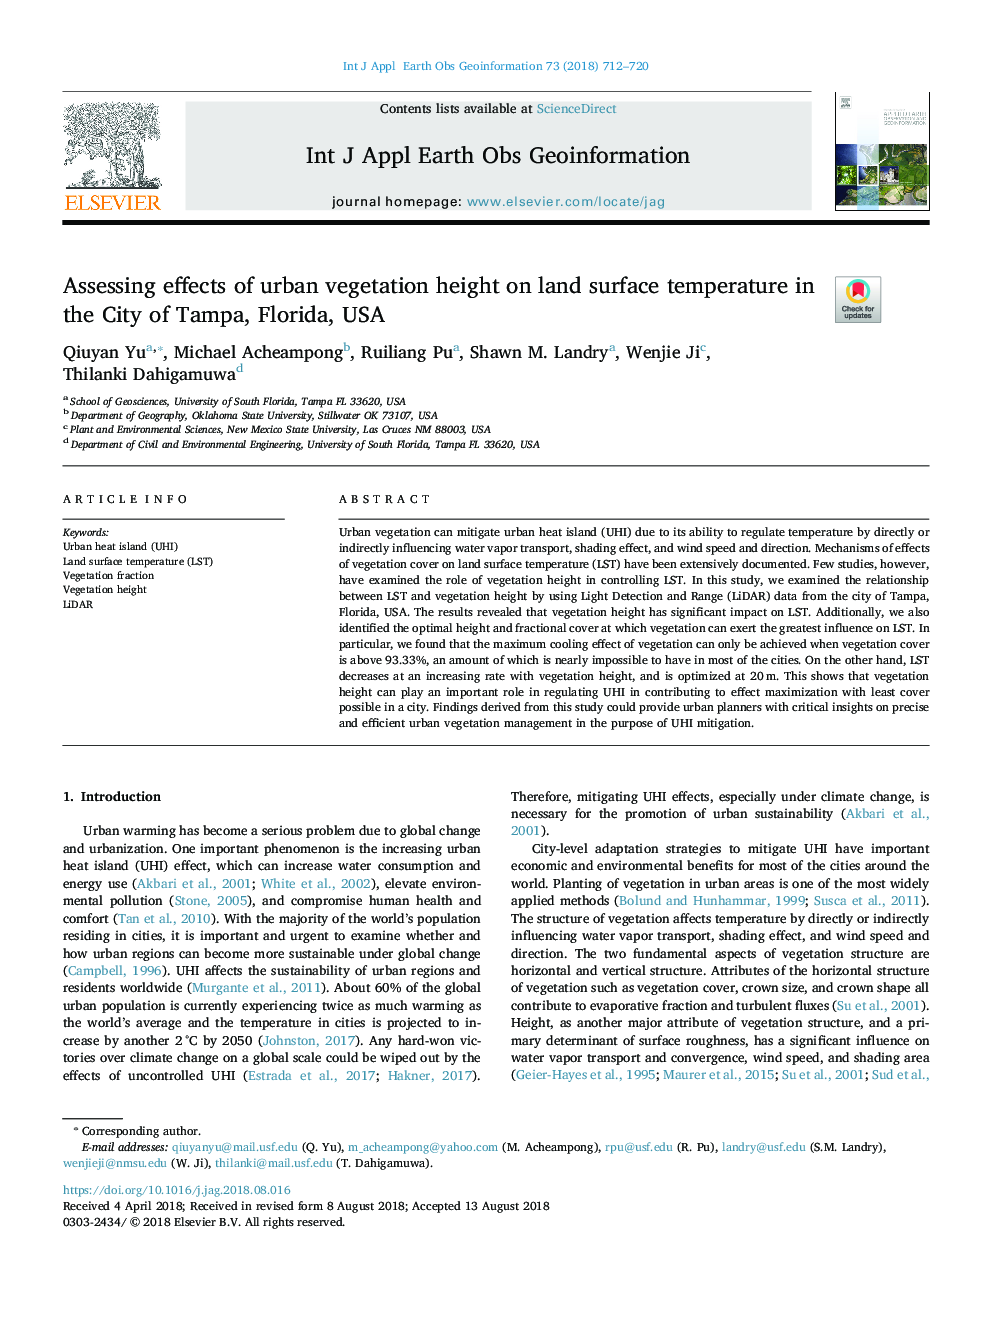 Assessing effects of urban vegetation height on land surface temperature in the City of Tampa, Florida, USA